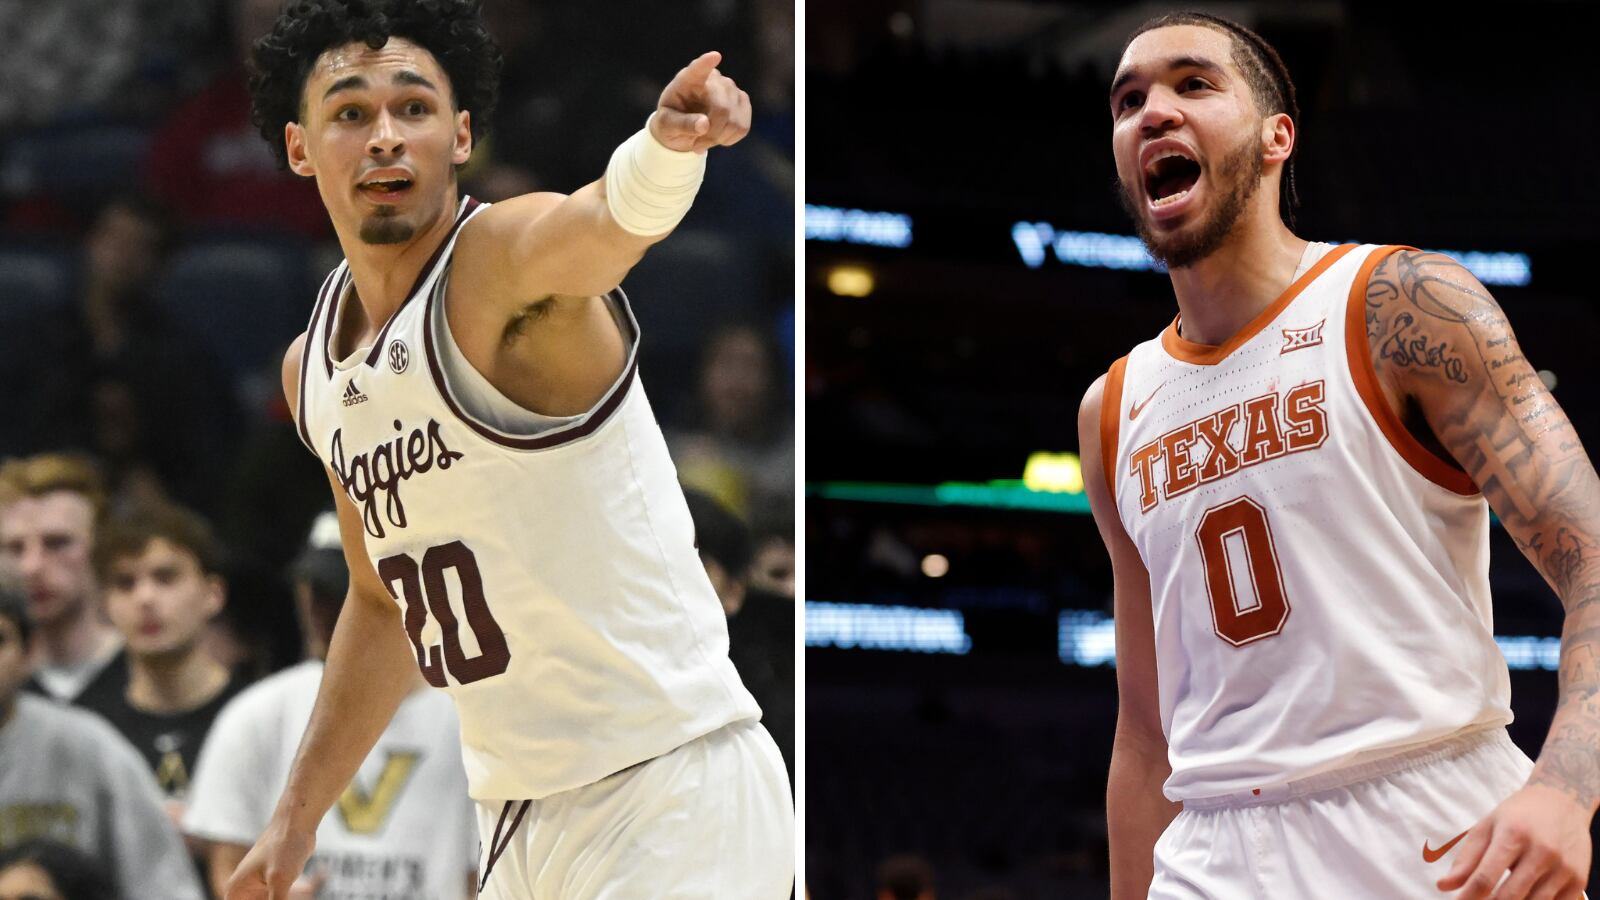 Texas A&M has a chance to square off against Texas in the second round of the NCAA tournament.